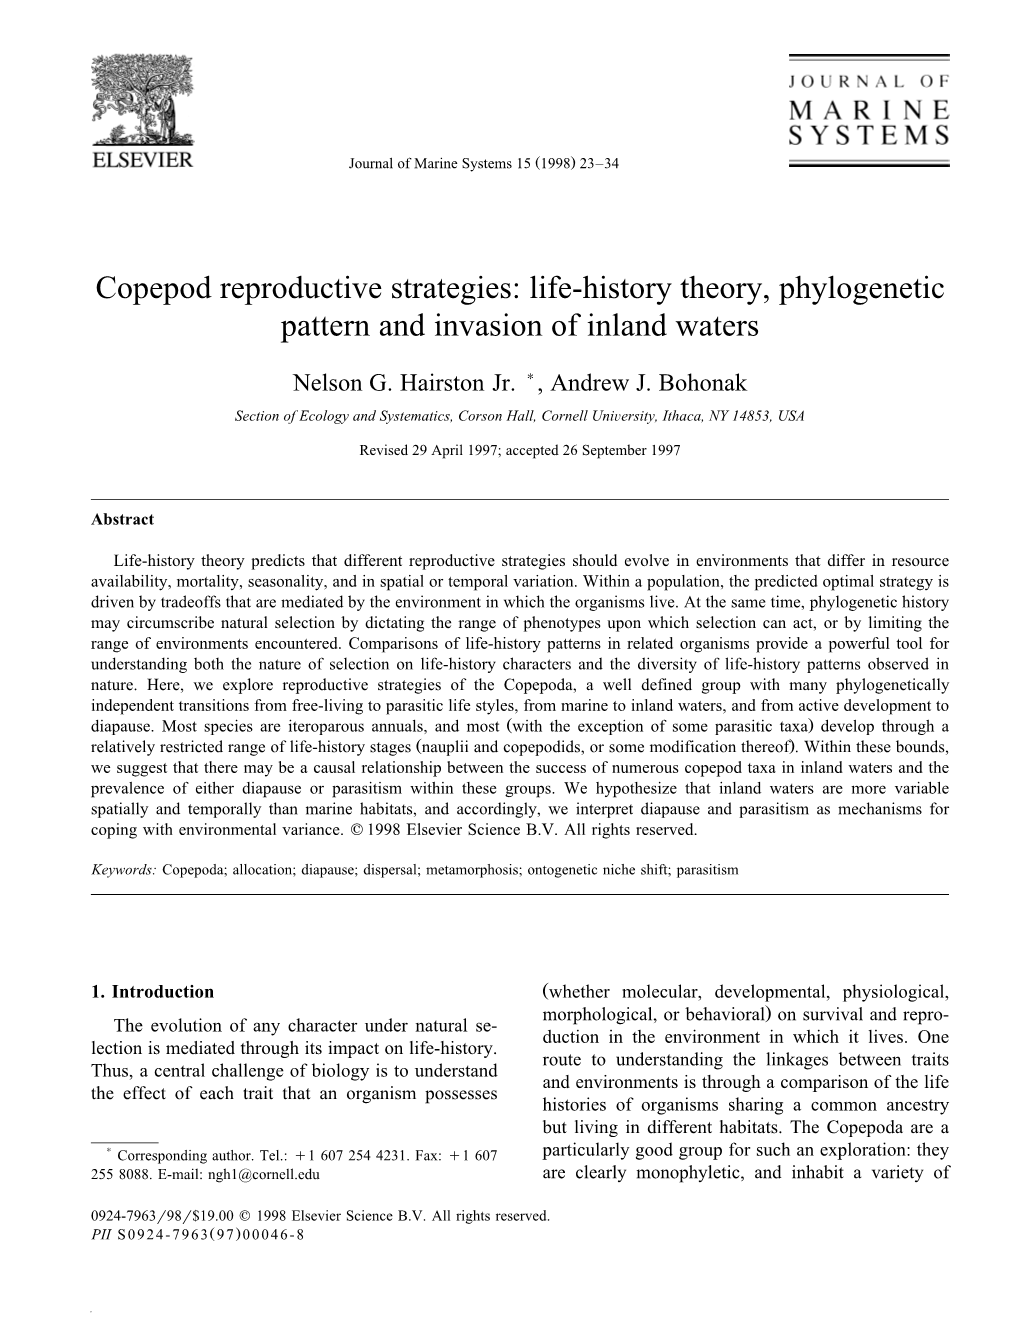 Copepod Reproductive Strategies: Life-History Theory, Phylogenetic Pattern and Invasion of Inland Waters